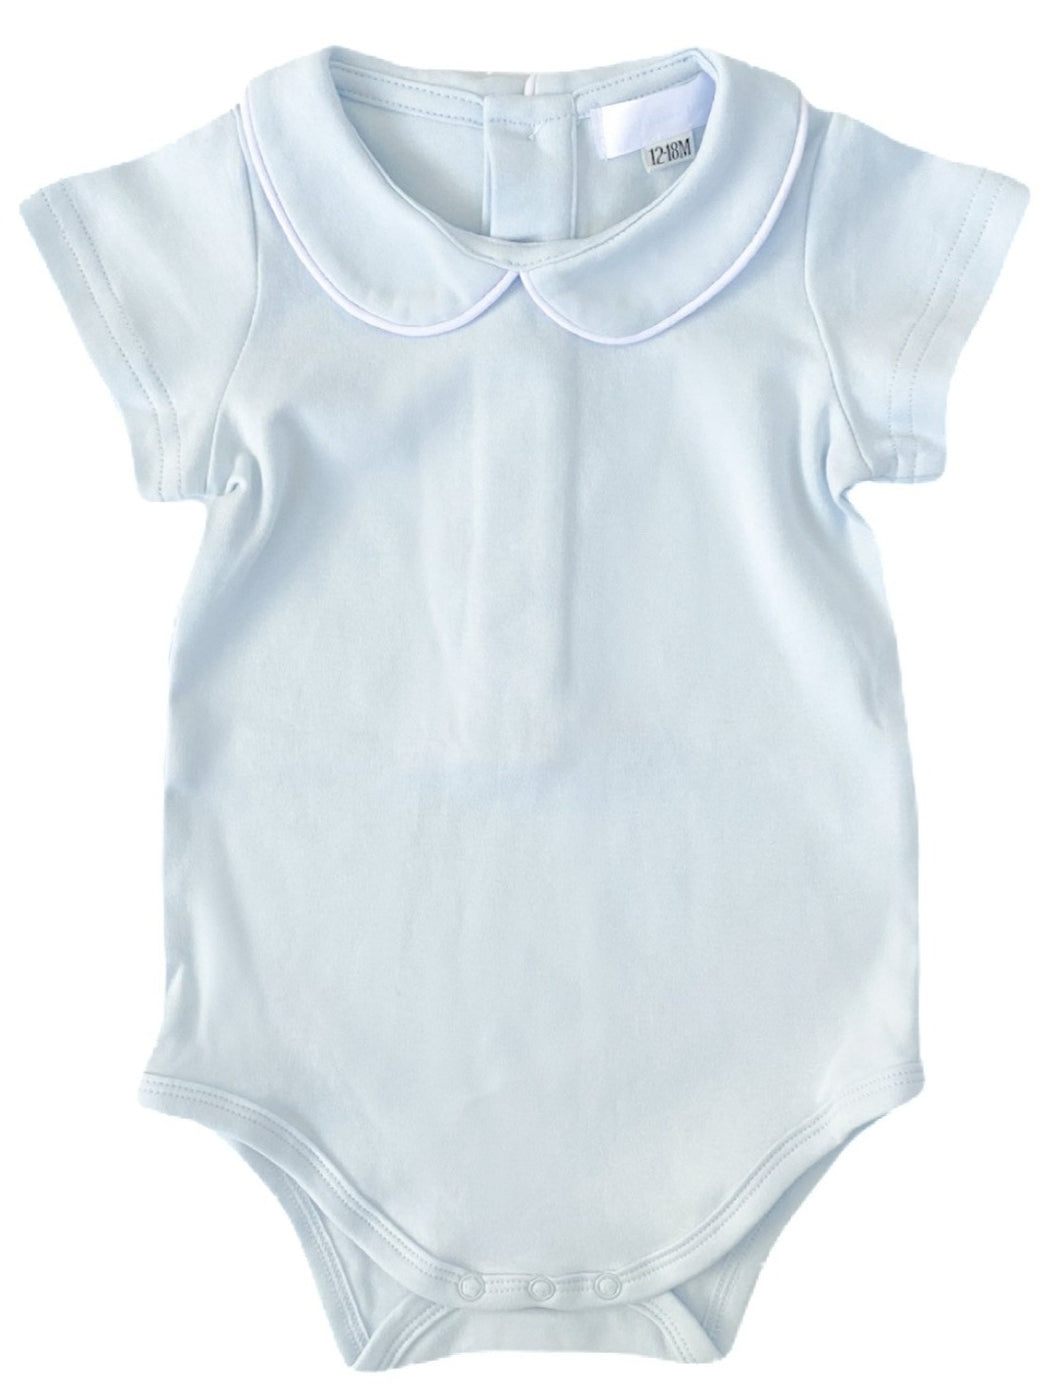 The Piped Collar Bodysuit - Light Blue